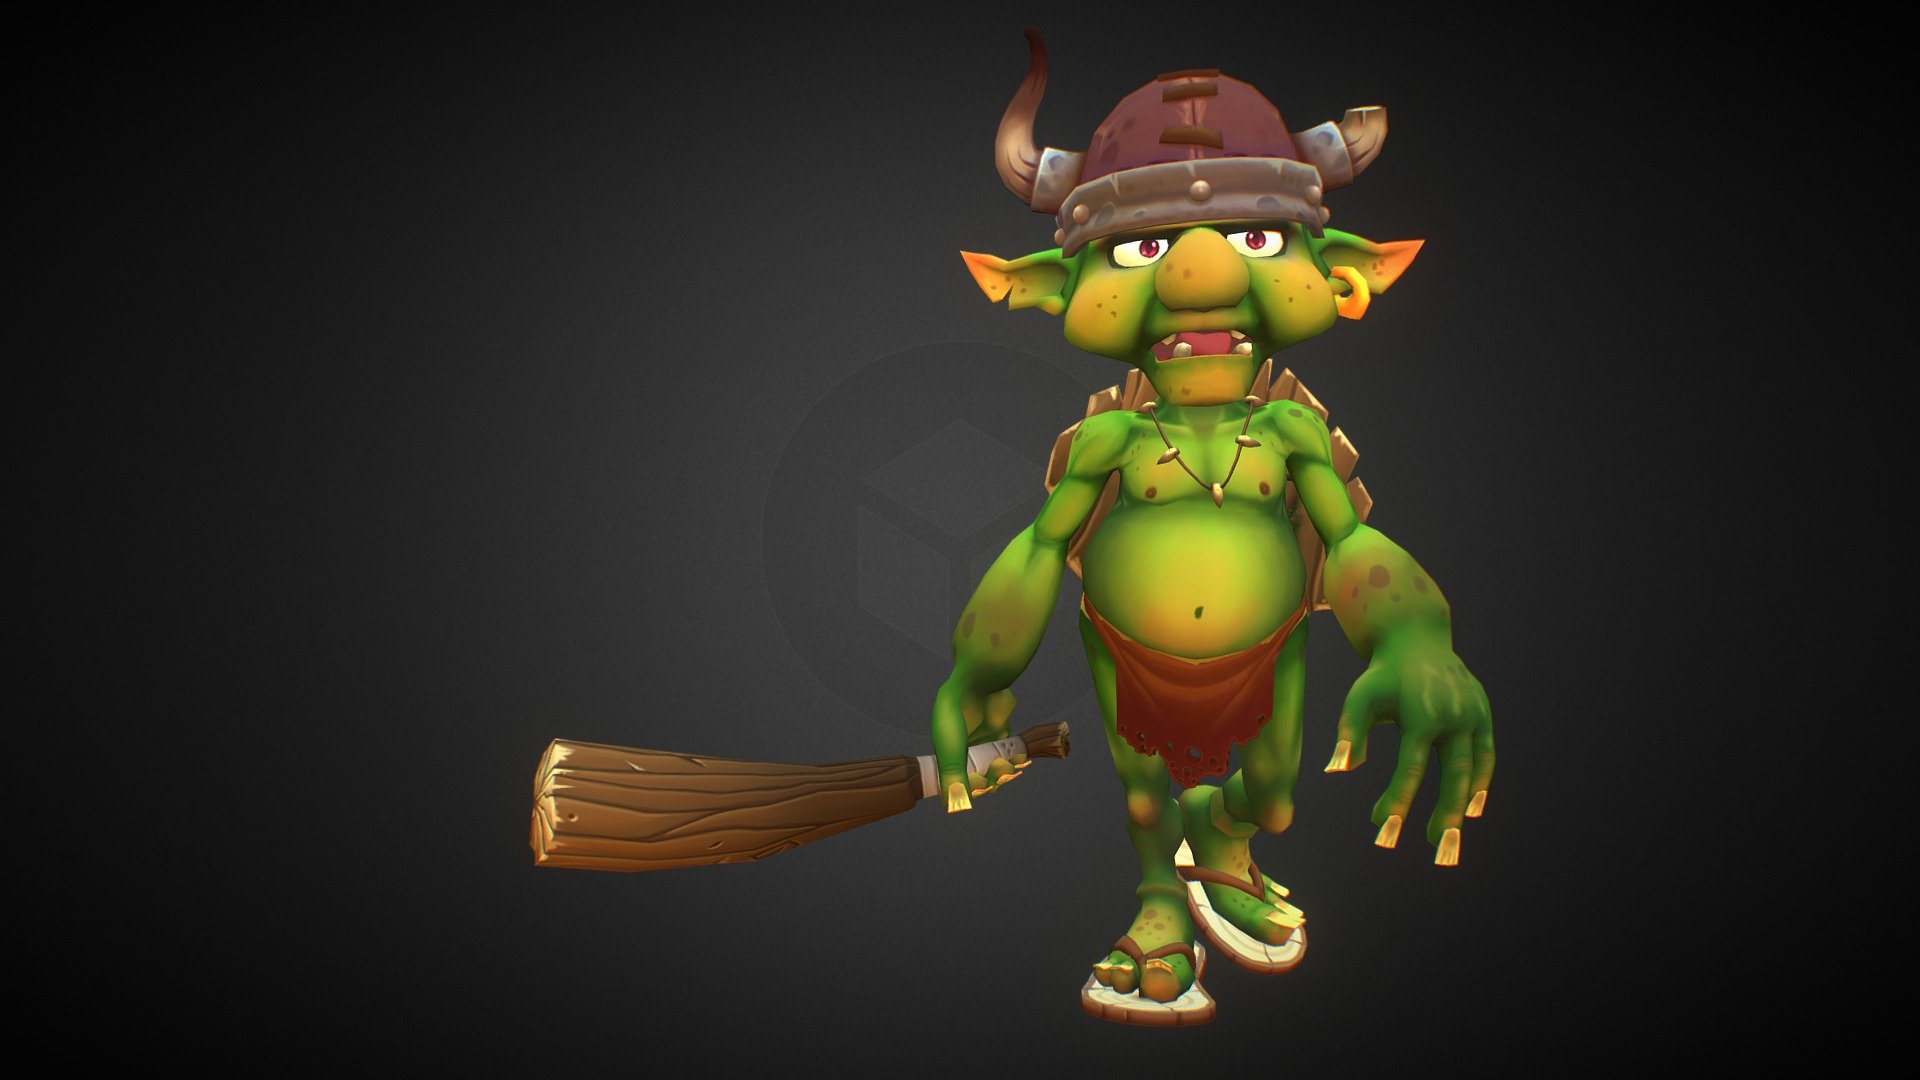 Hi, 

This is a silly goblin that I did long time ago, just for learn how to rigging a character in maya 3d model